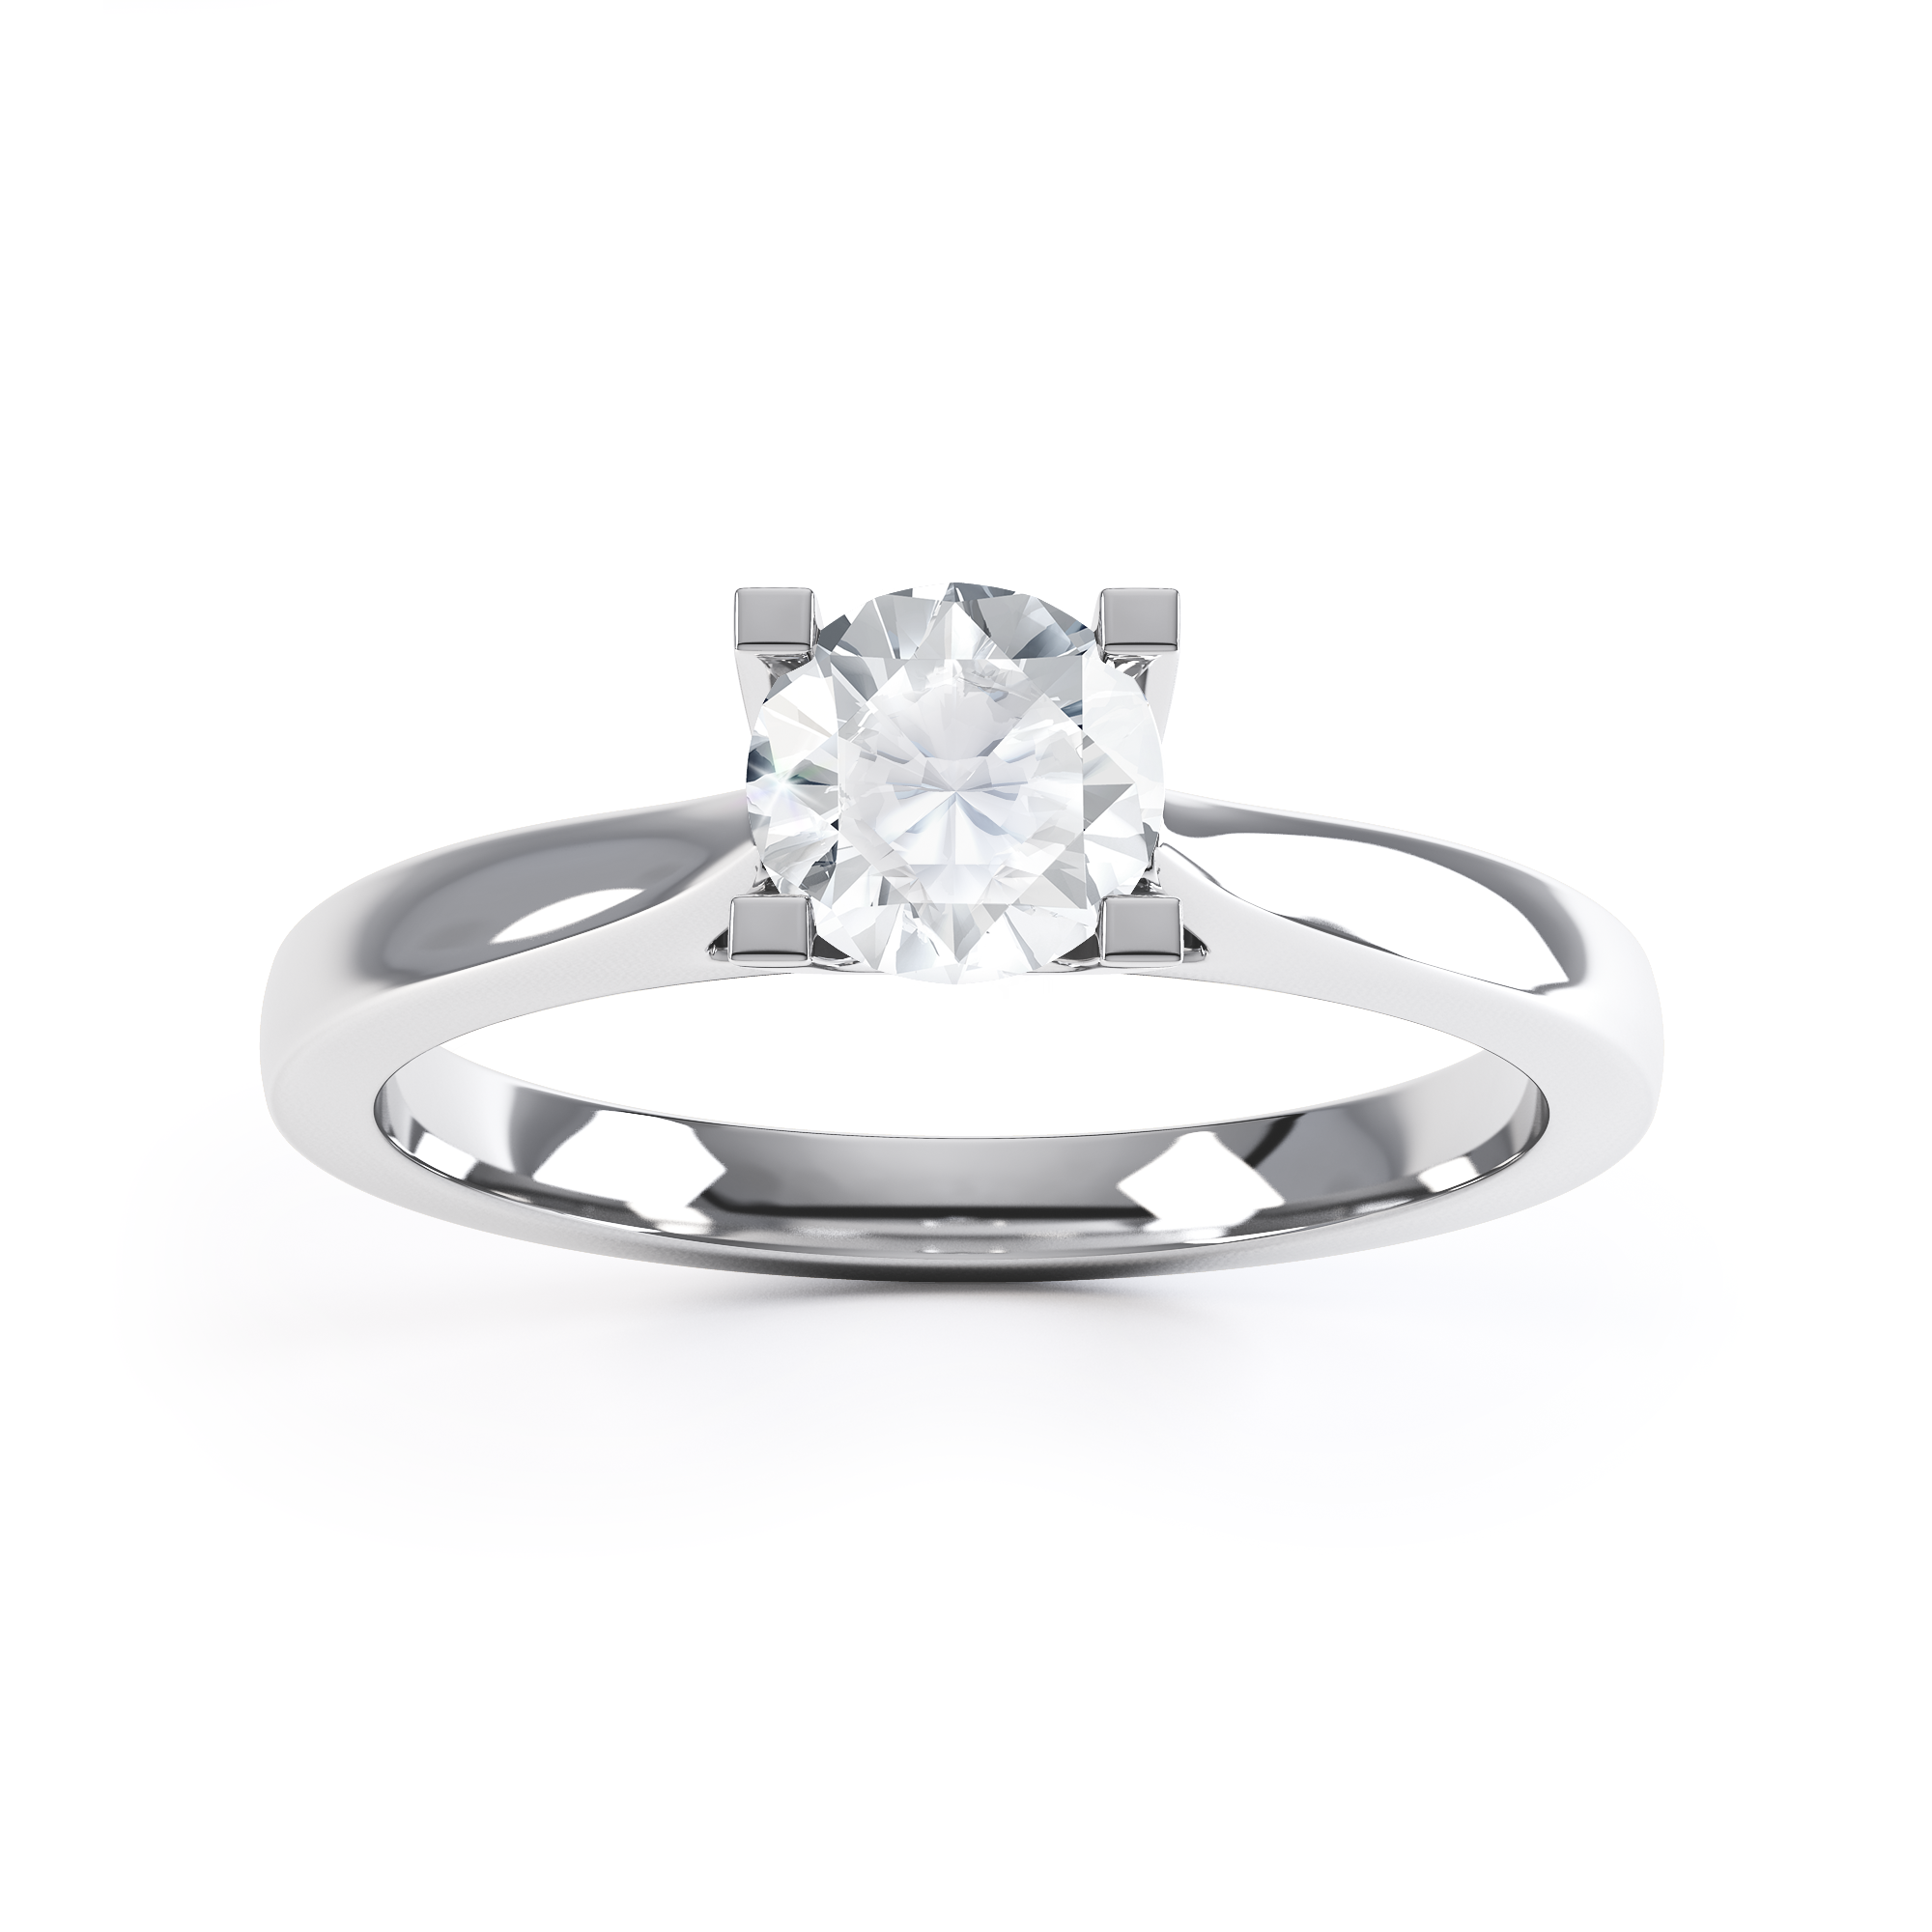 Round Brilliant Cut Centre Stone, Four claw, Tapered Shoulders, Diamond Engagement Ring